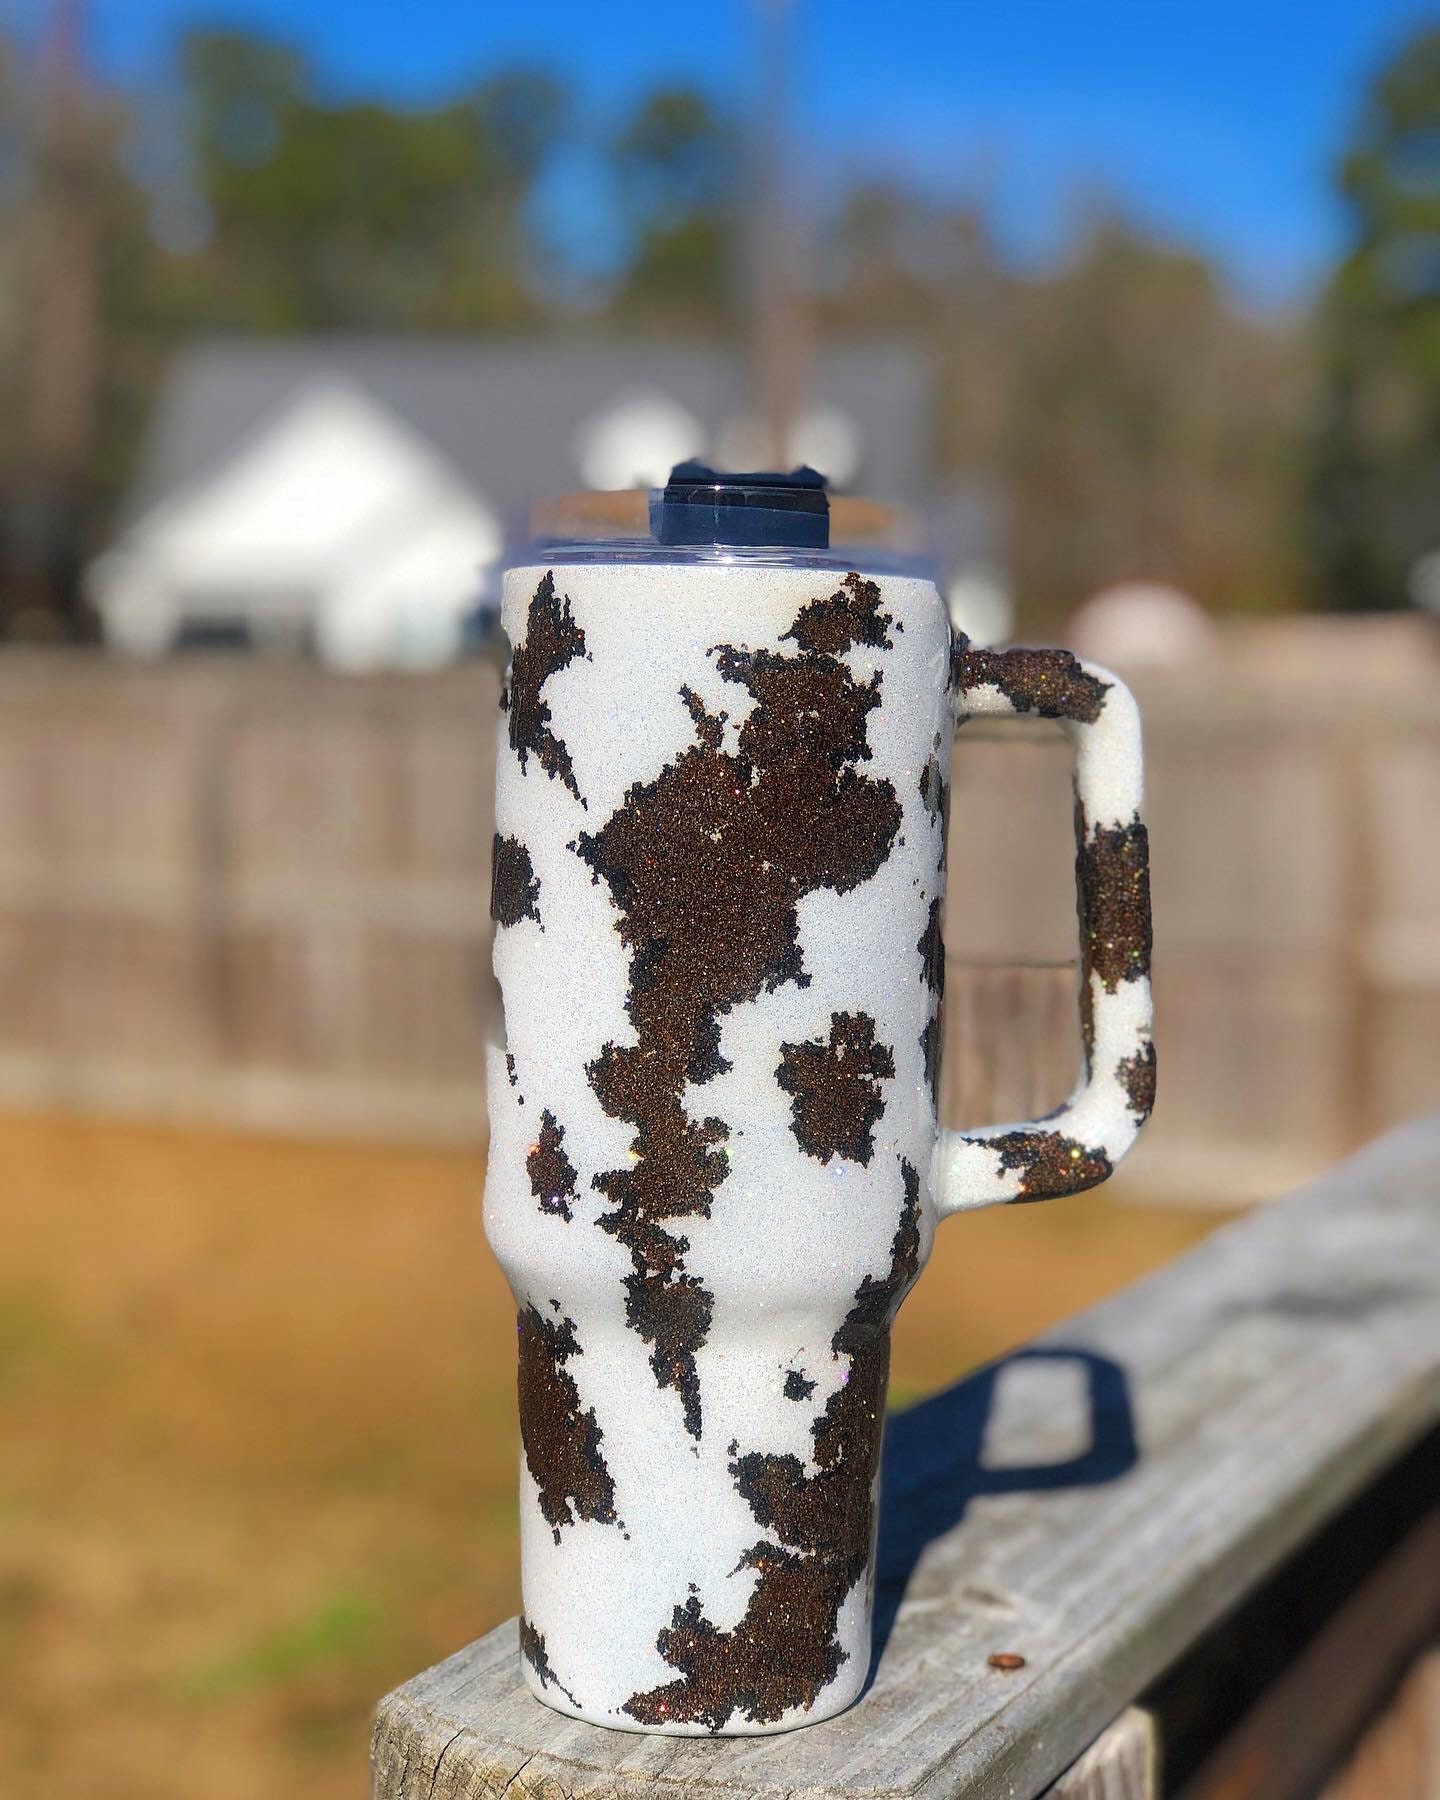 40 oz Cow Print Tumbler With Handle – mckenna-creations